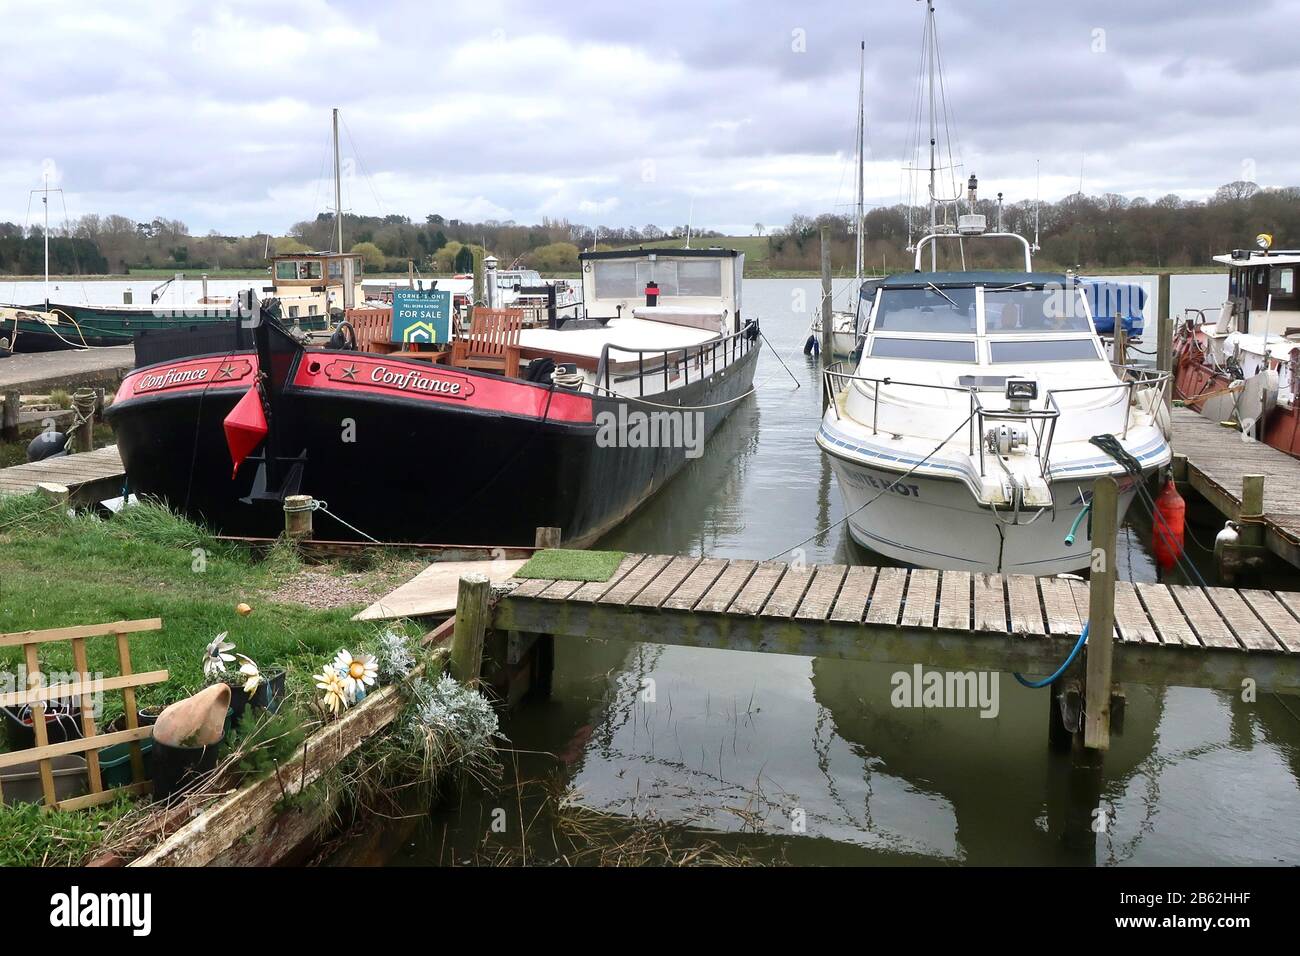 Woodbridge, Suffolk, UK - 9 March 2020: Houseboat for sale seen on a wet and windy afternoon walk alongside the River Deben from Woodbridge to Melton. Stock Photo